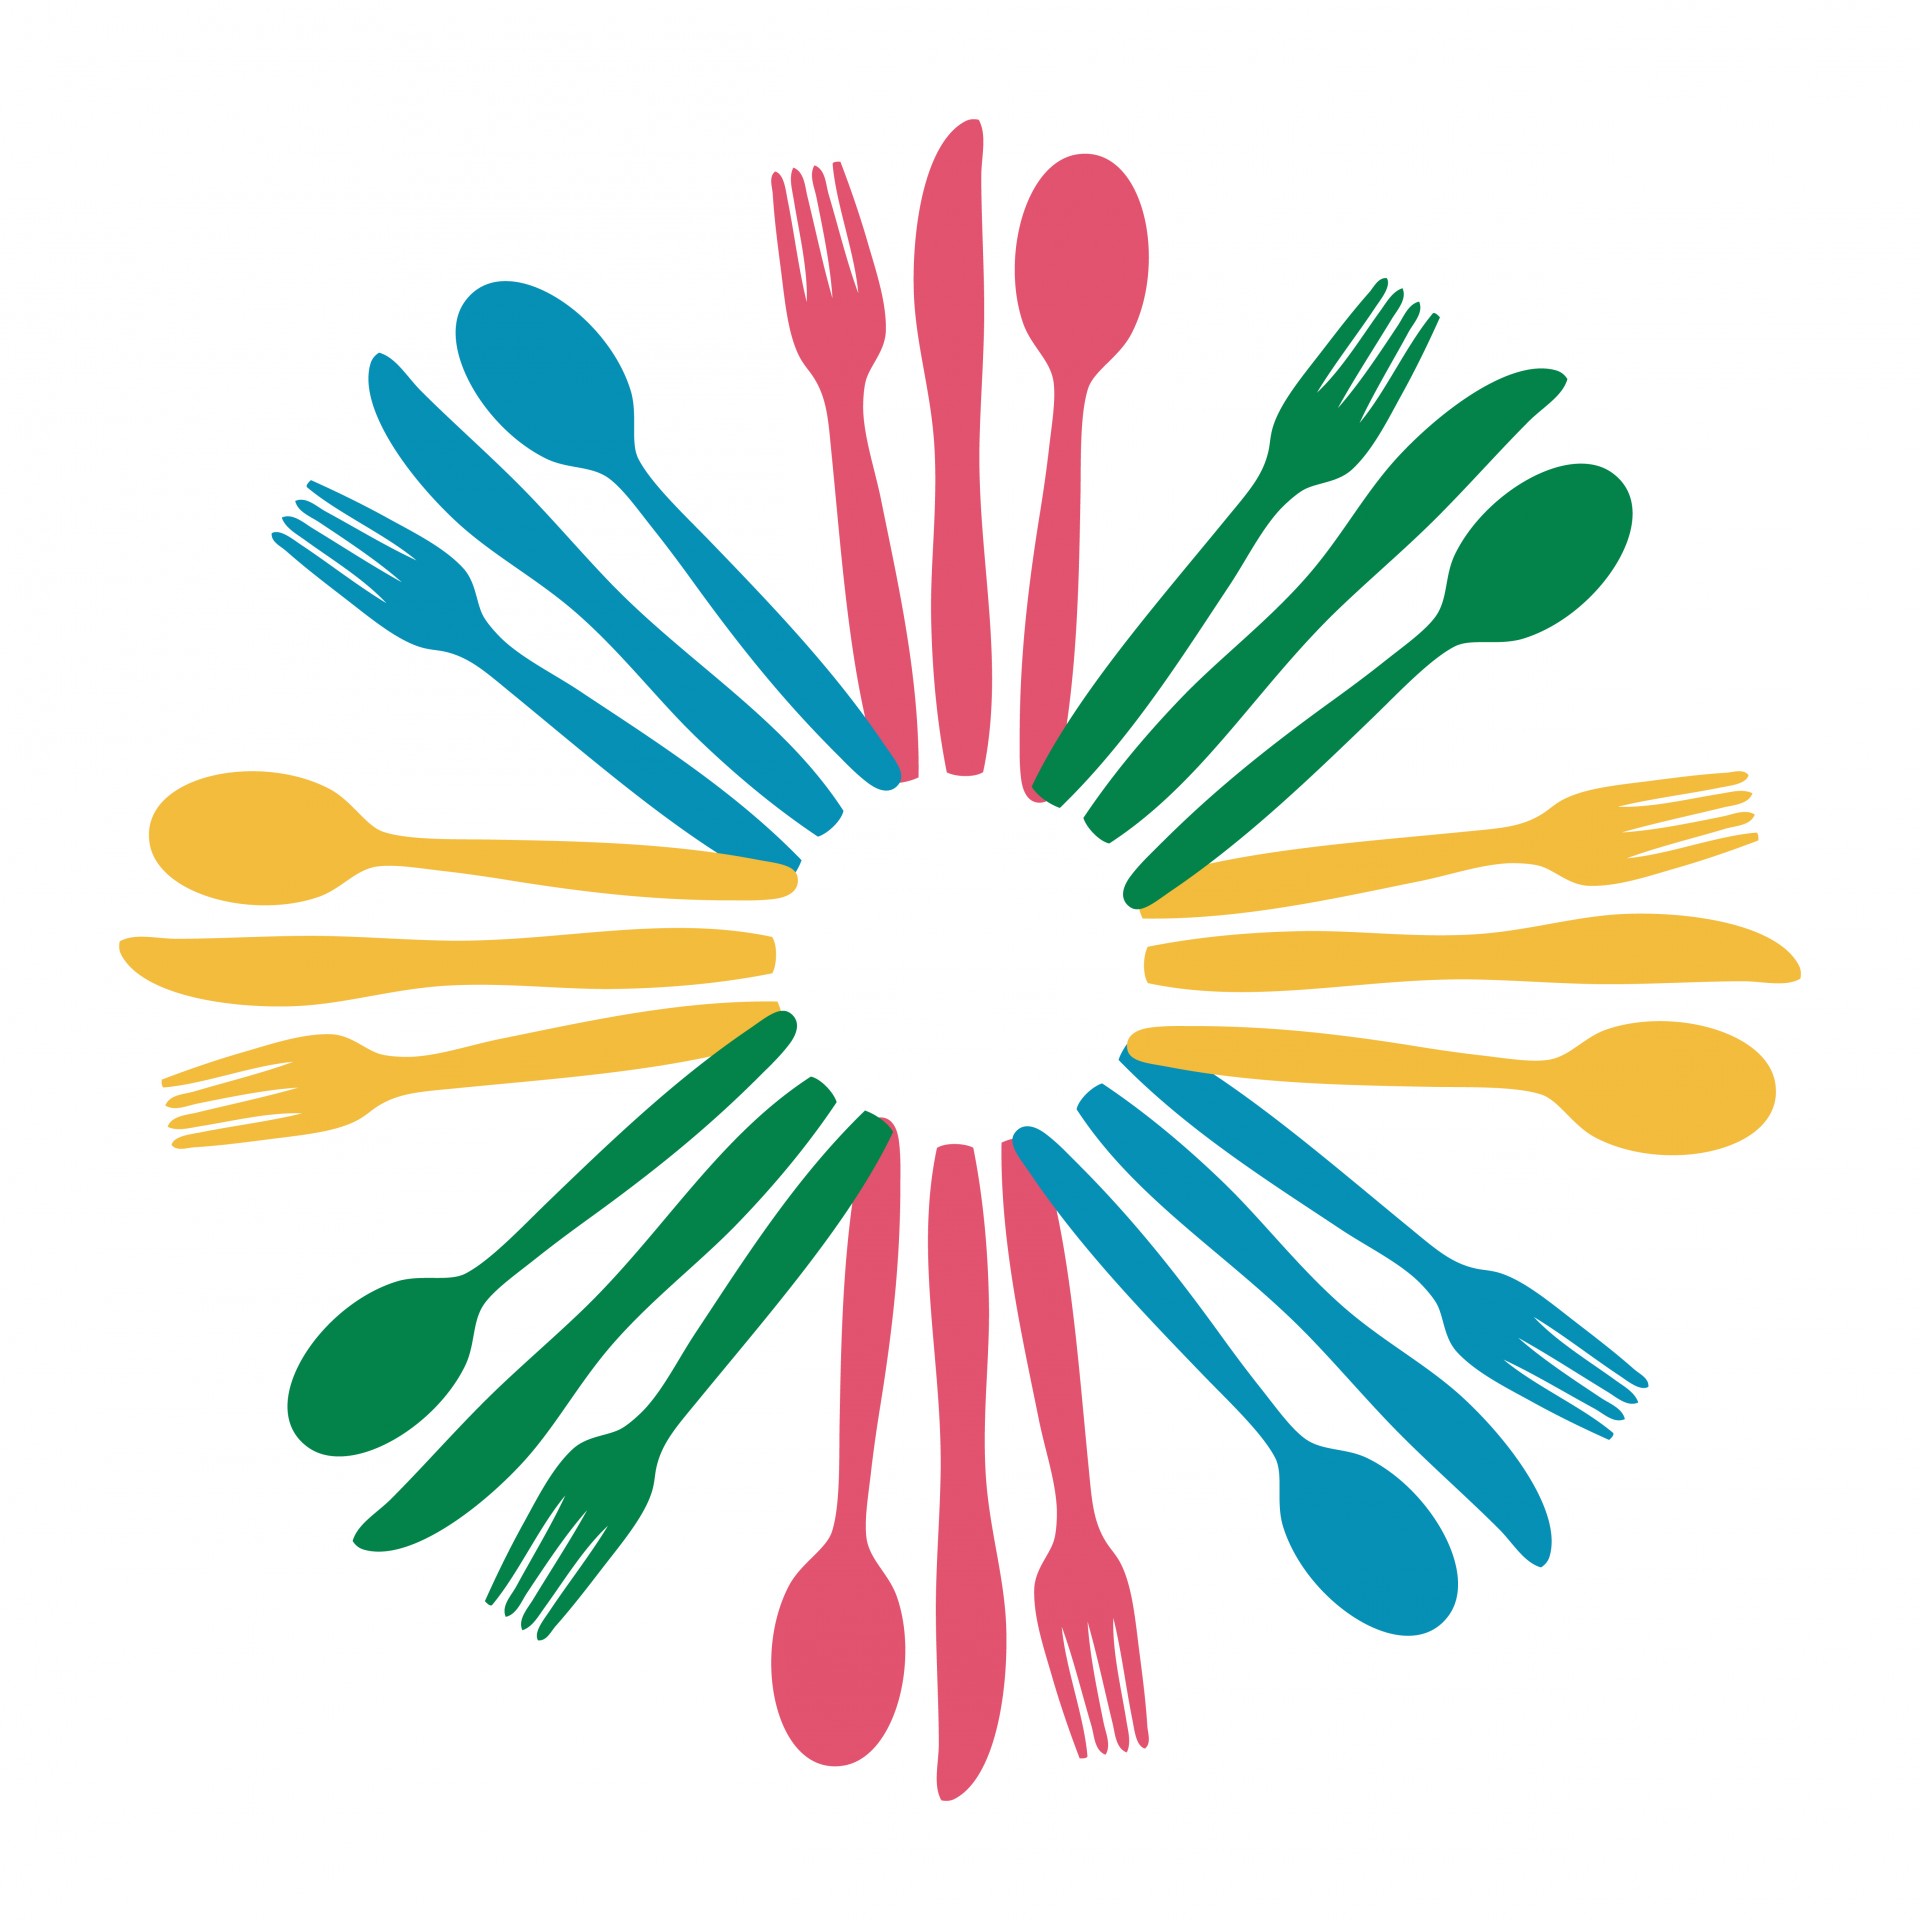 Colorful set of cutlery clipart ideal for a logo